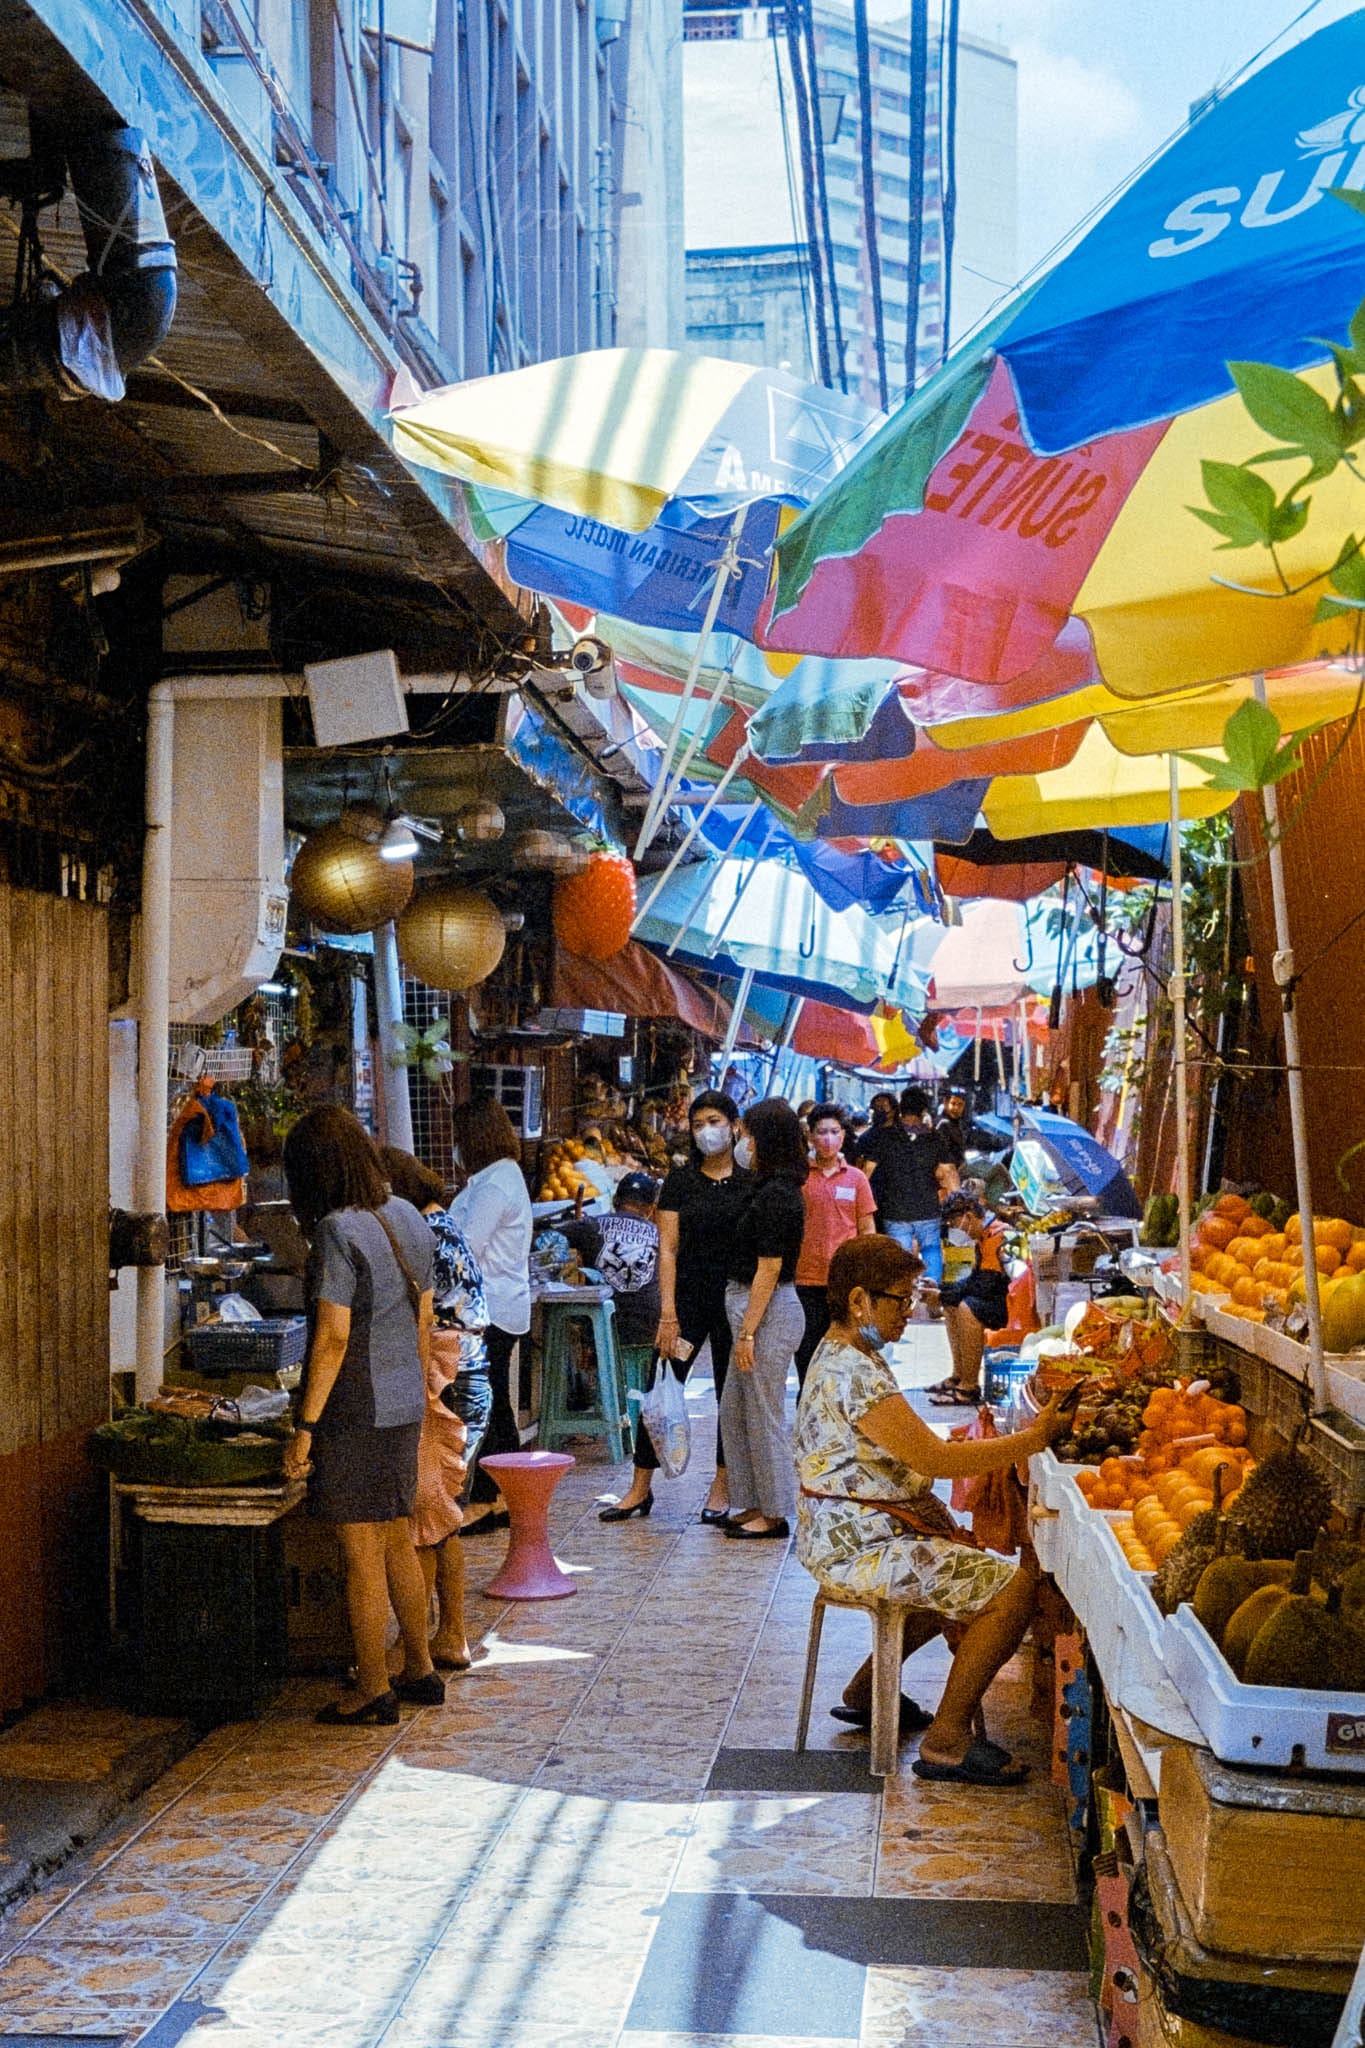 Bustling urban street market brimming with colorful stalls, local goods, and community interactions.